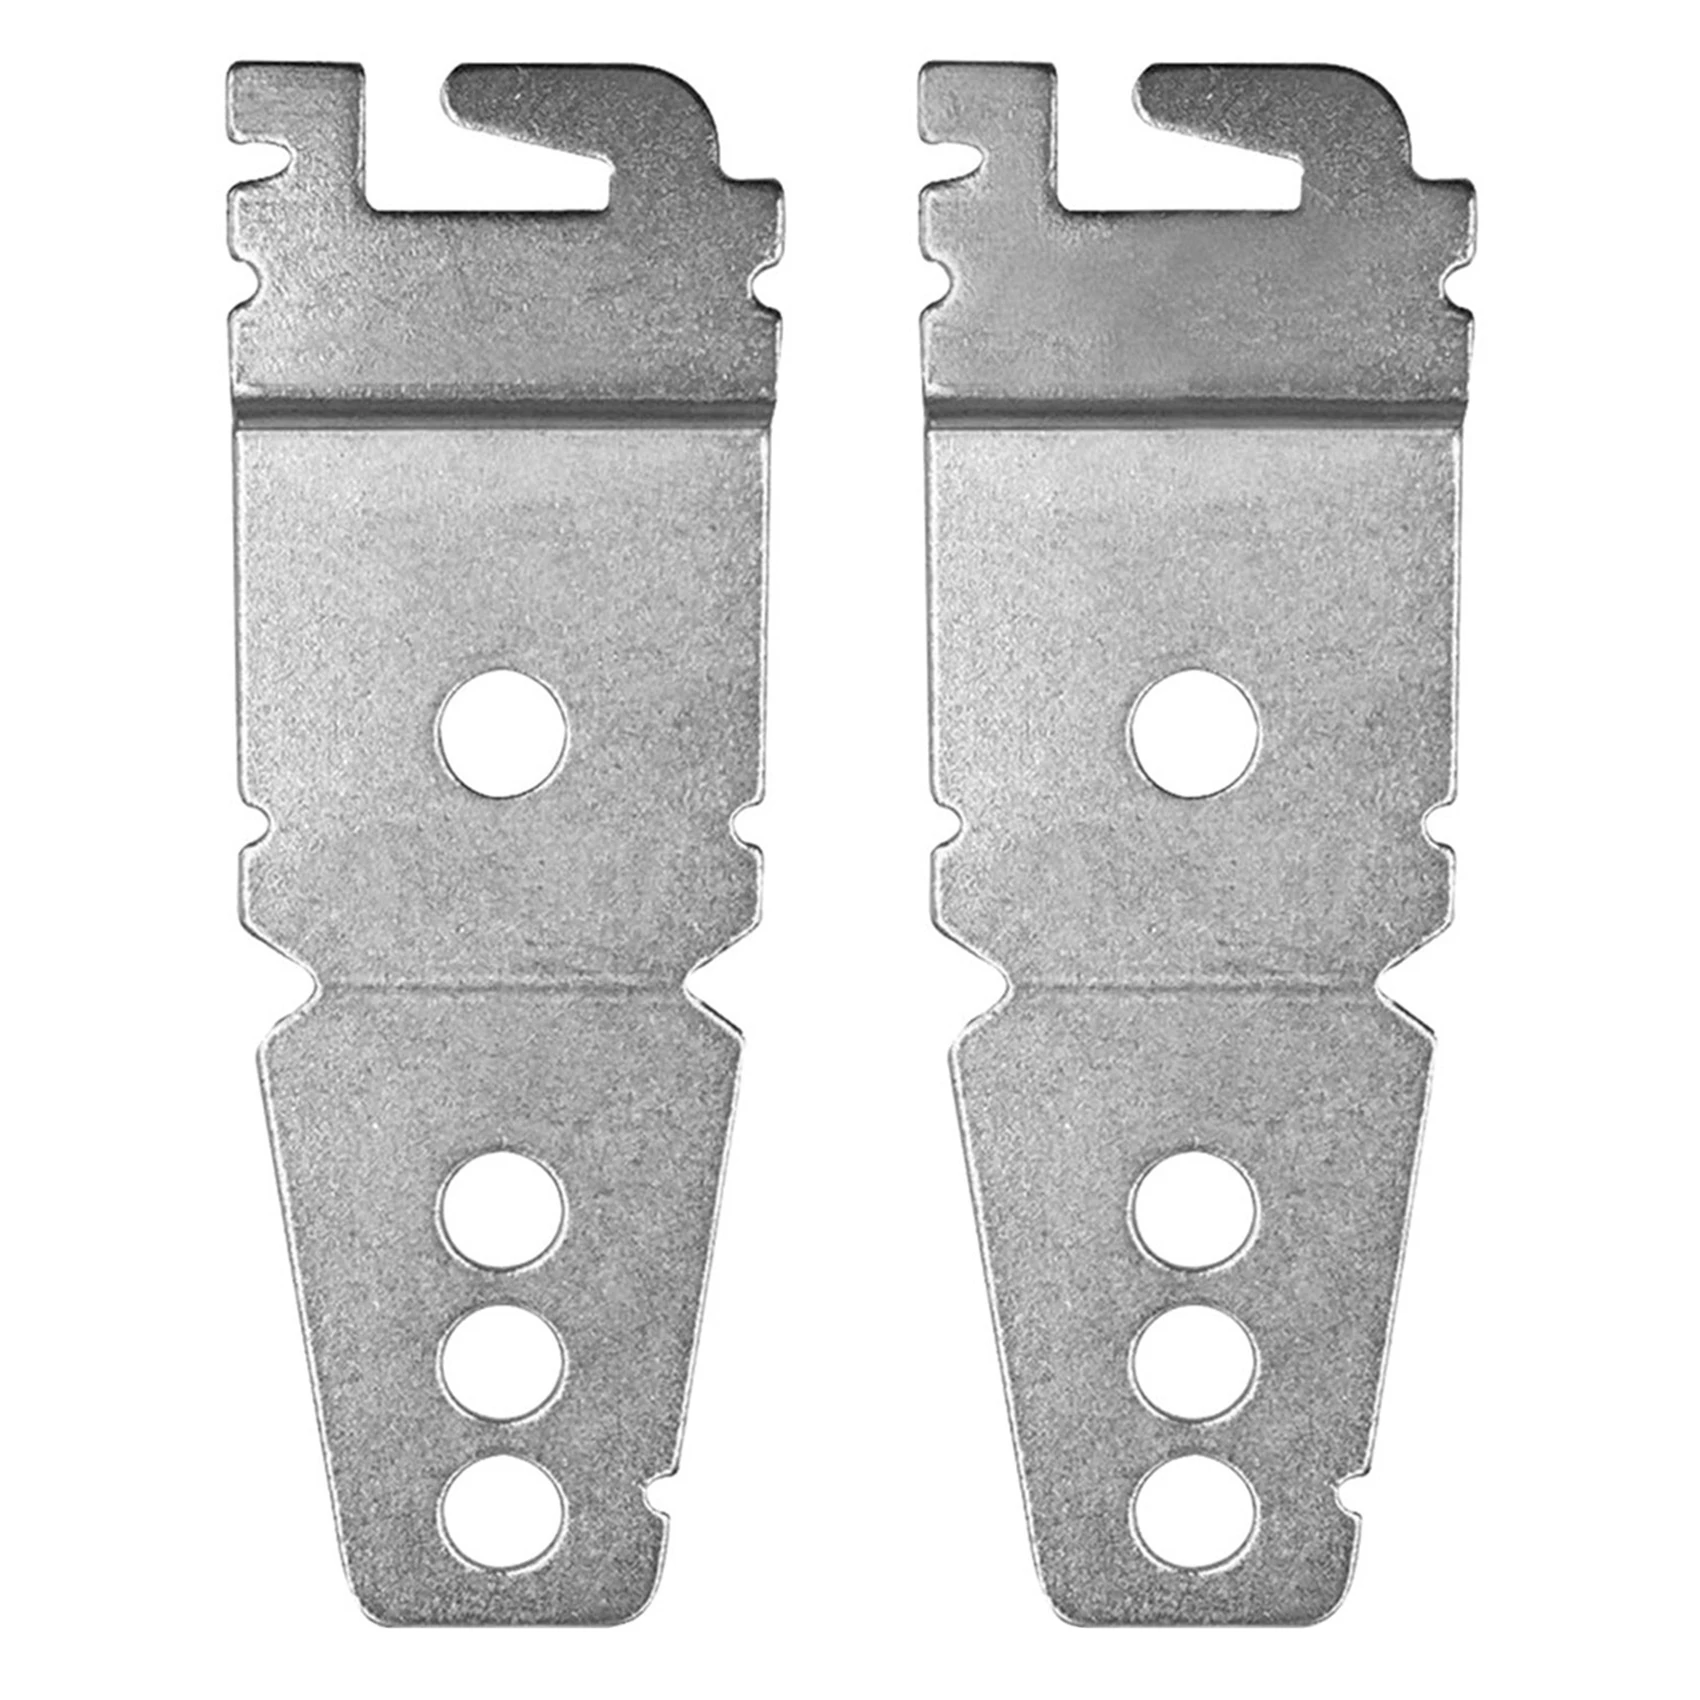 

2 Pieces Of 8269145 Under-Counter Dishwasher Bracket Replacement Parts-Replaceable Dishwasher Upper Mounting Bracket